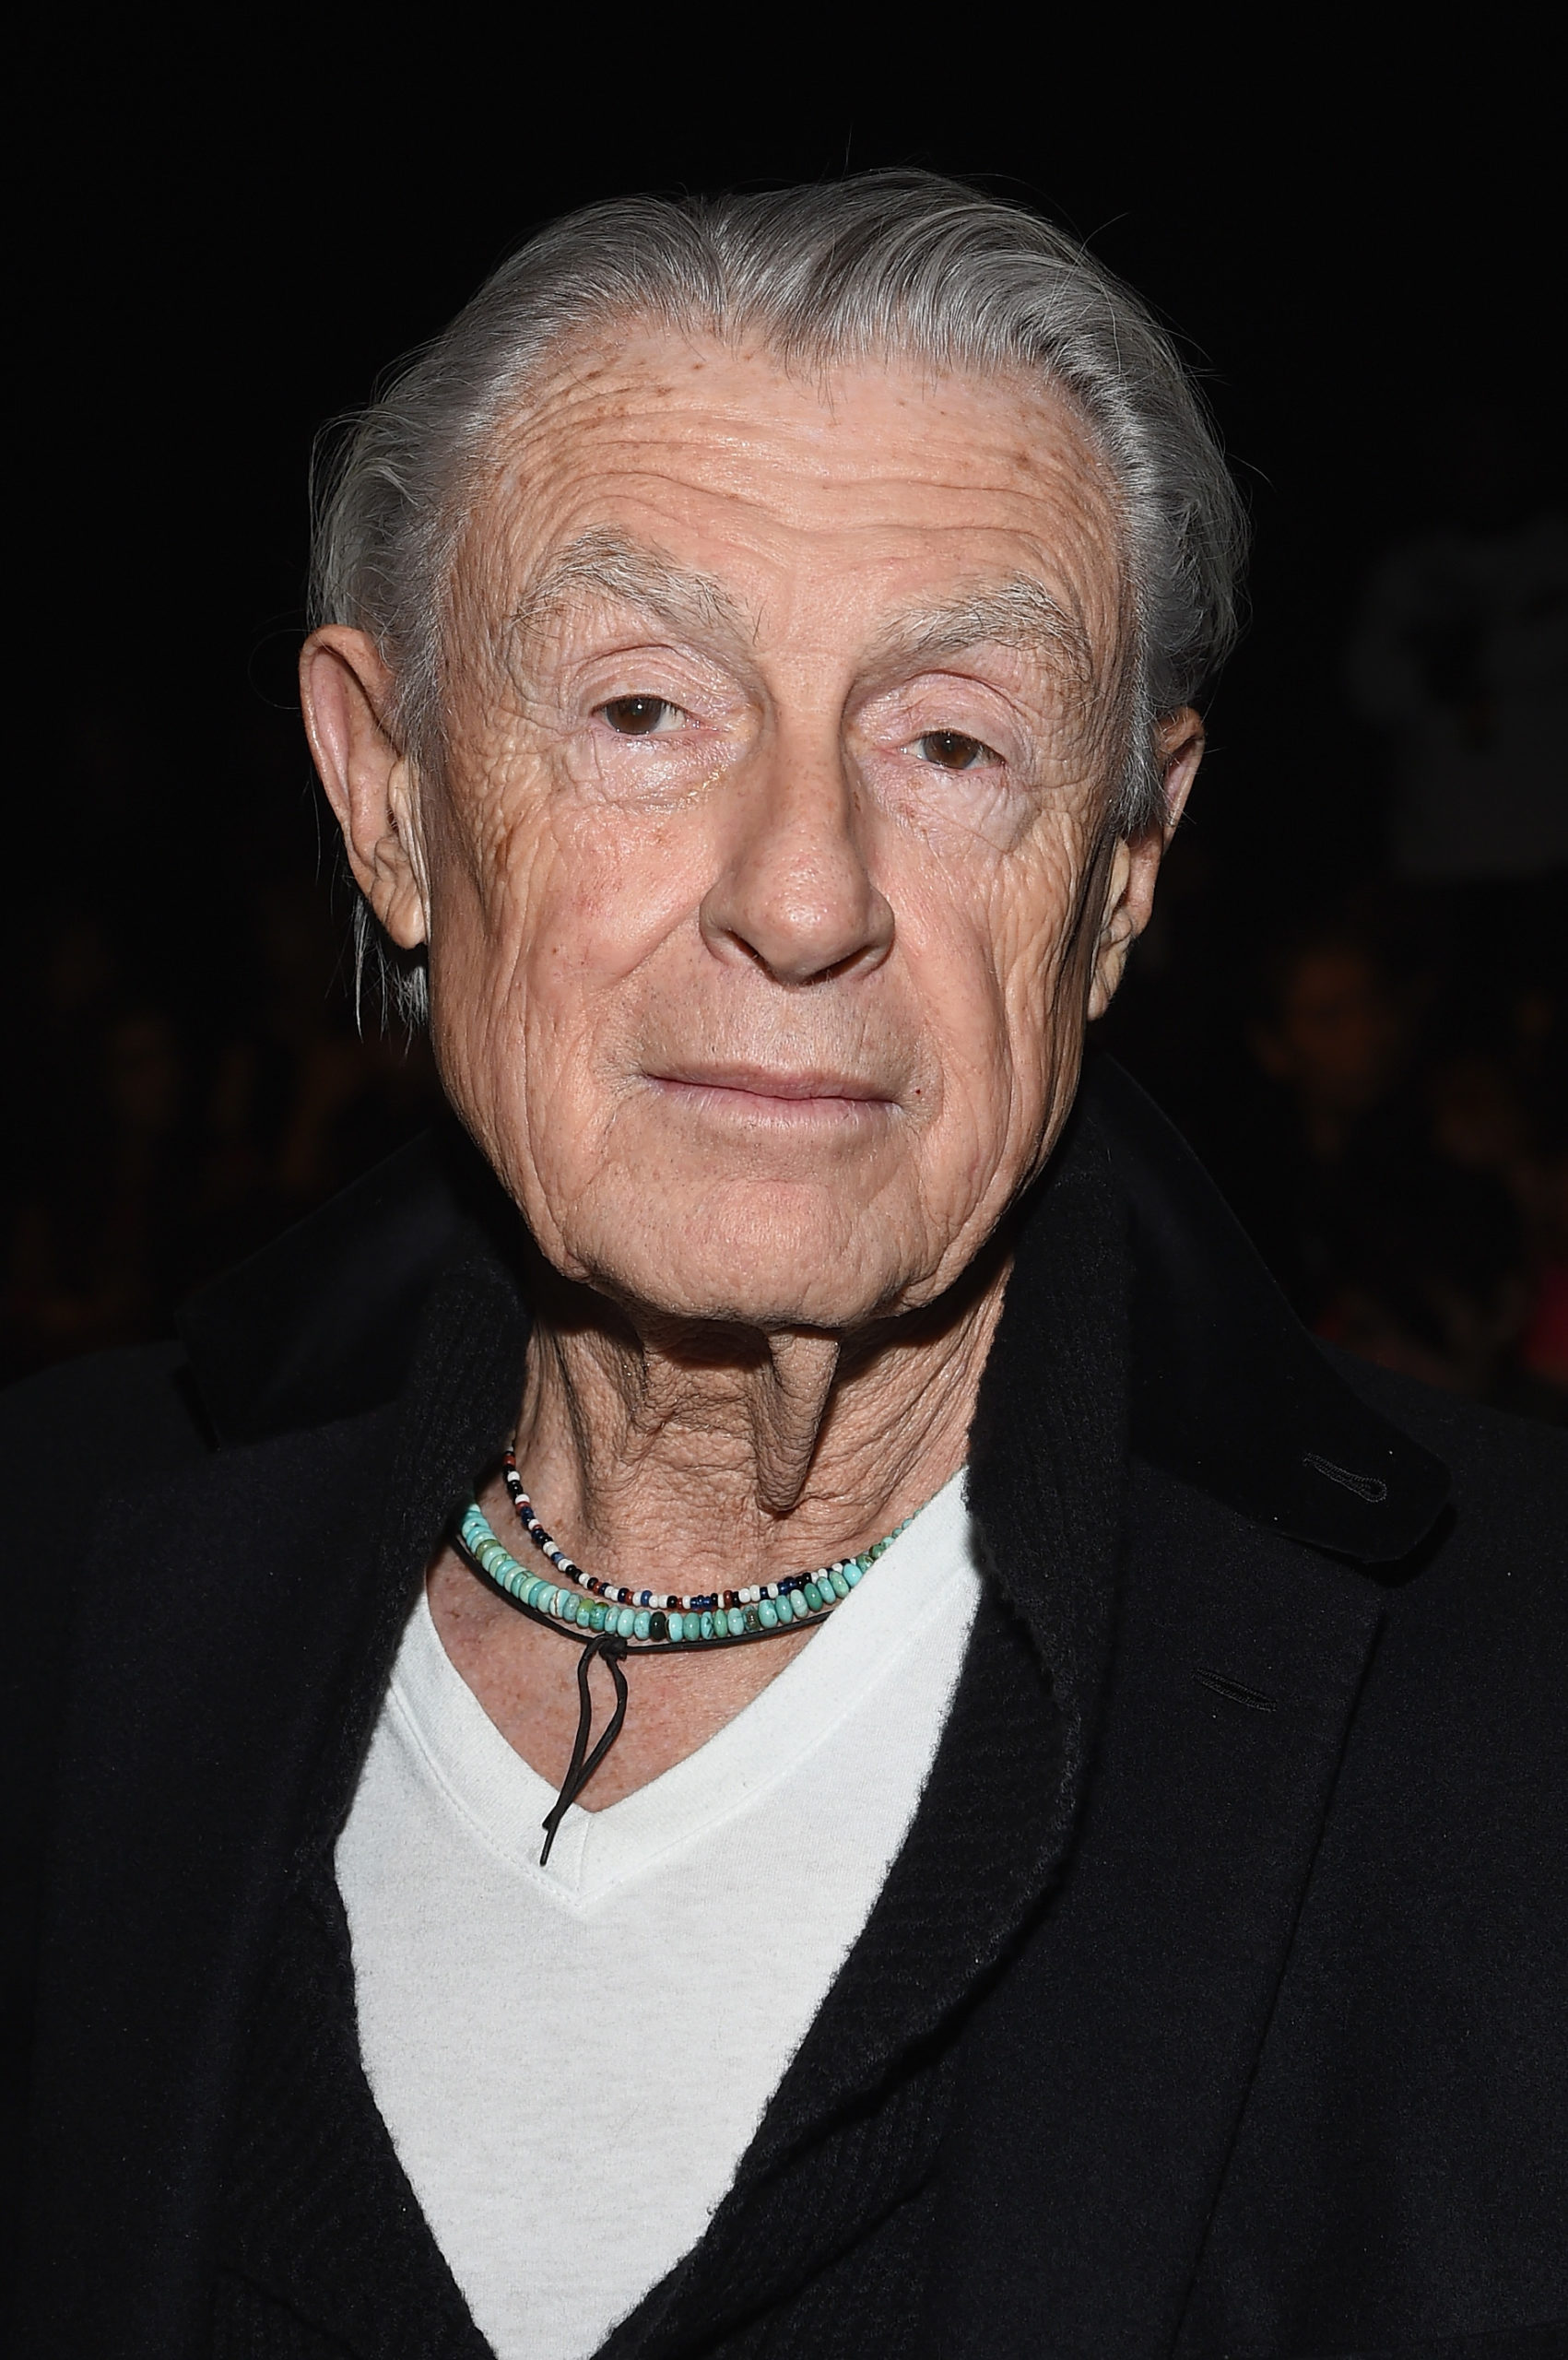 Joel Schumacher (Photo: Mike Coppola/Getty Images for Mercedes-Benz Fashion Week, Getty Images)